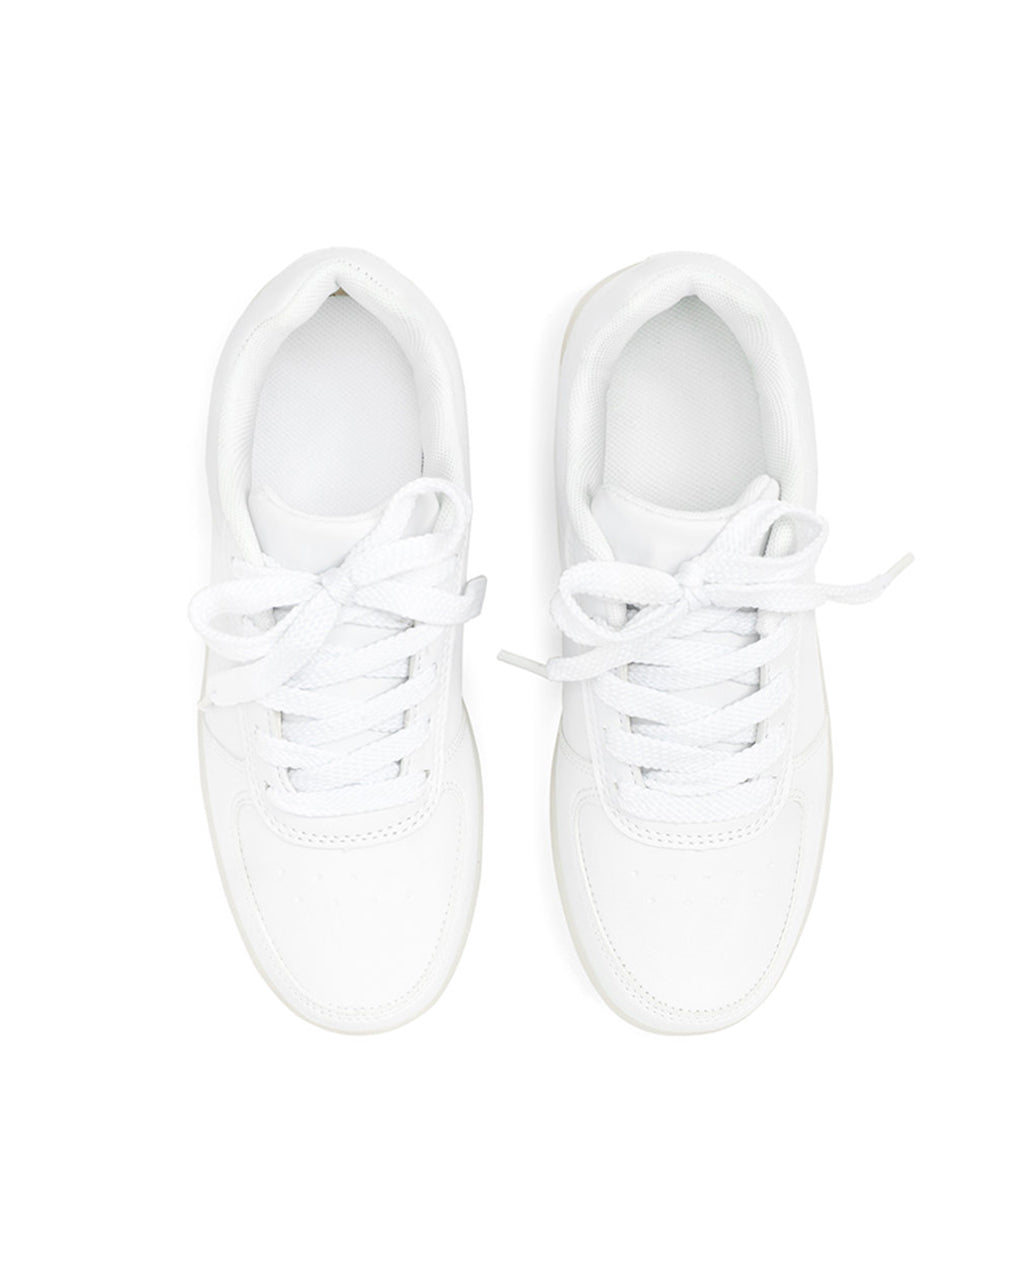 White Light Up Sneakers by party store - shoes - ban.do